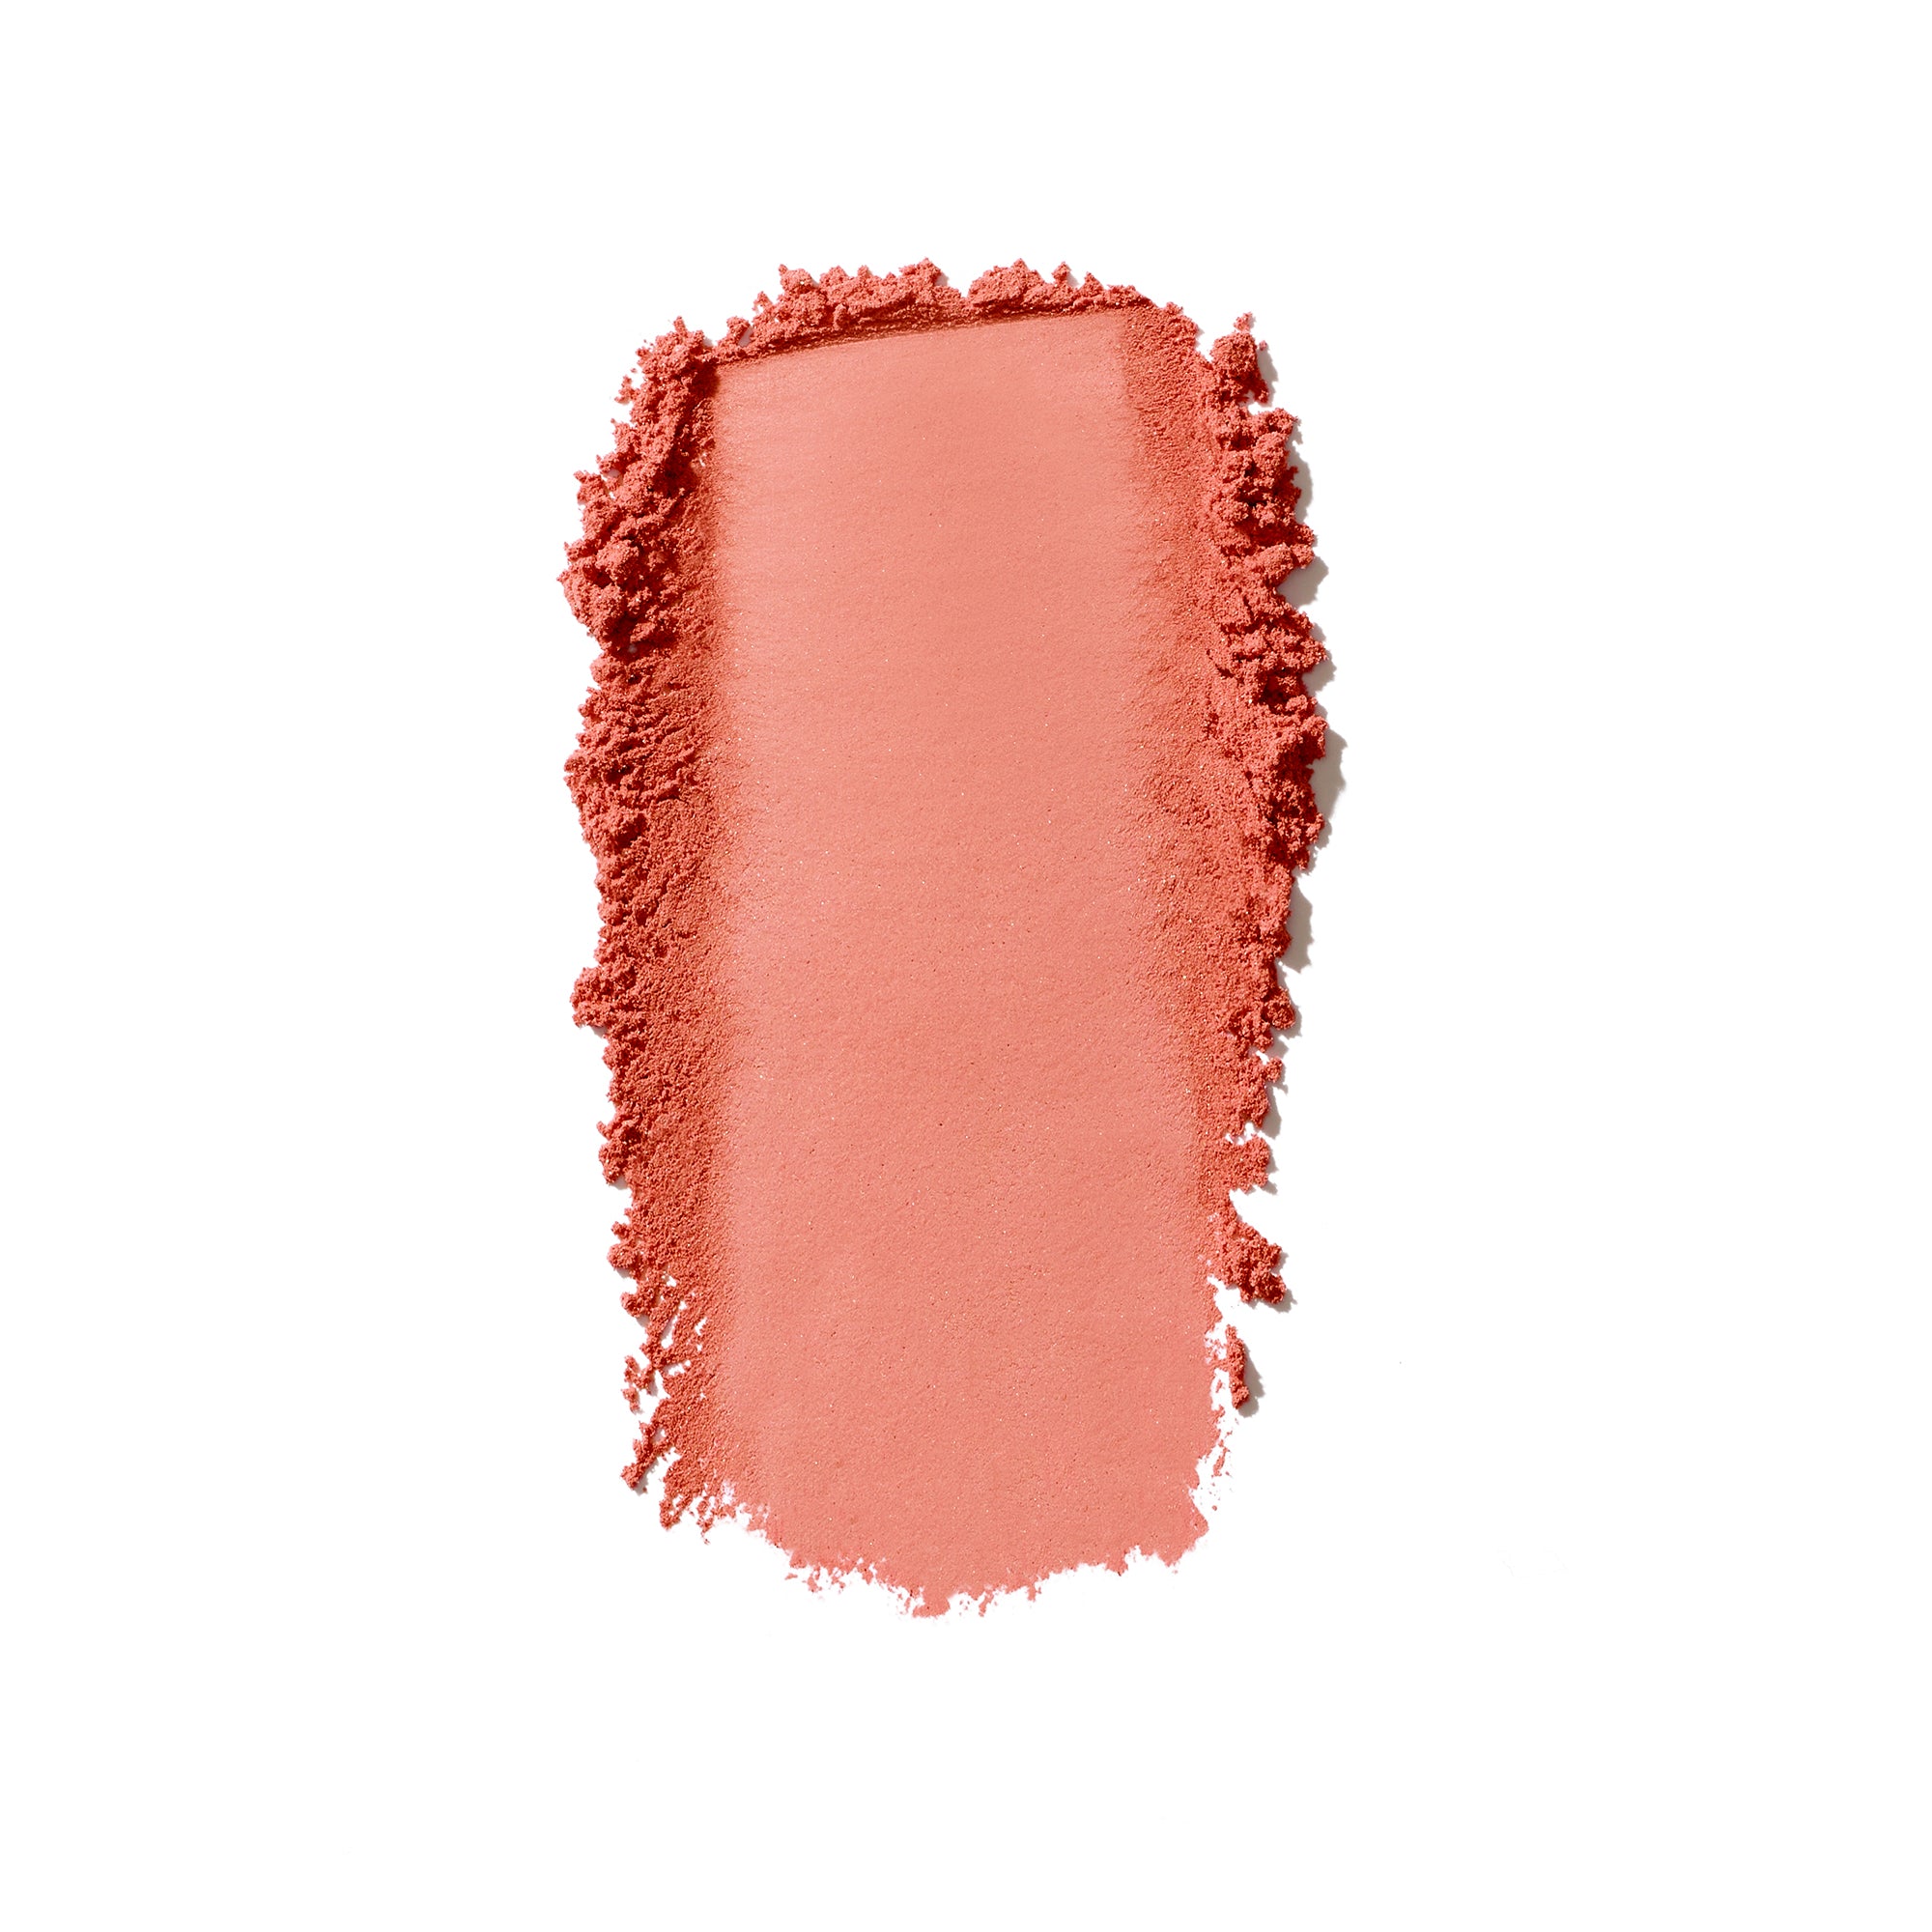 Jane Iredale PurePressed Blush - Limited Edition 30th Anniversary Collection / Velvet Petal / Swatch